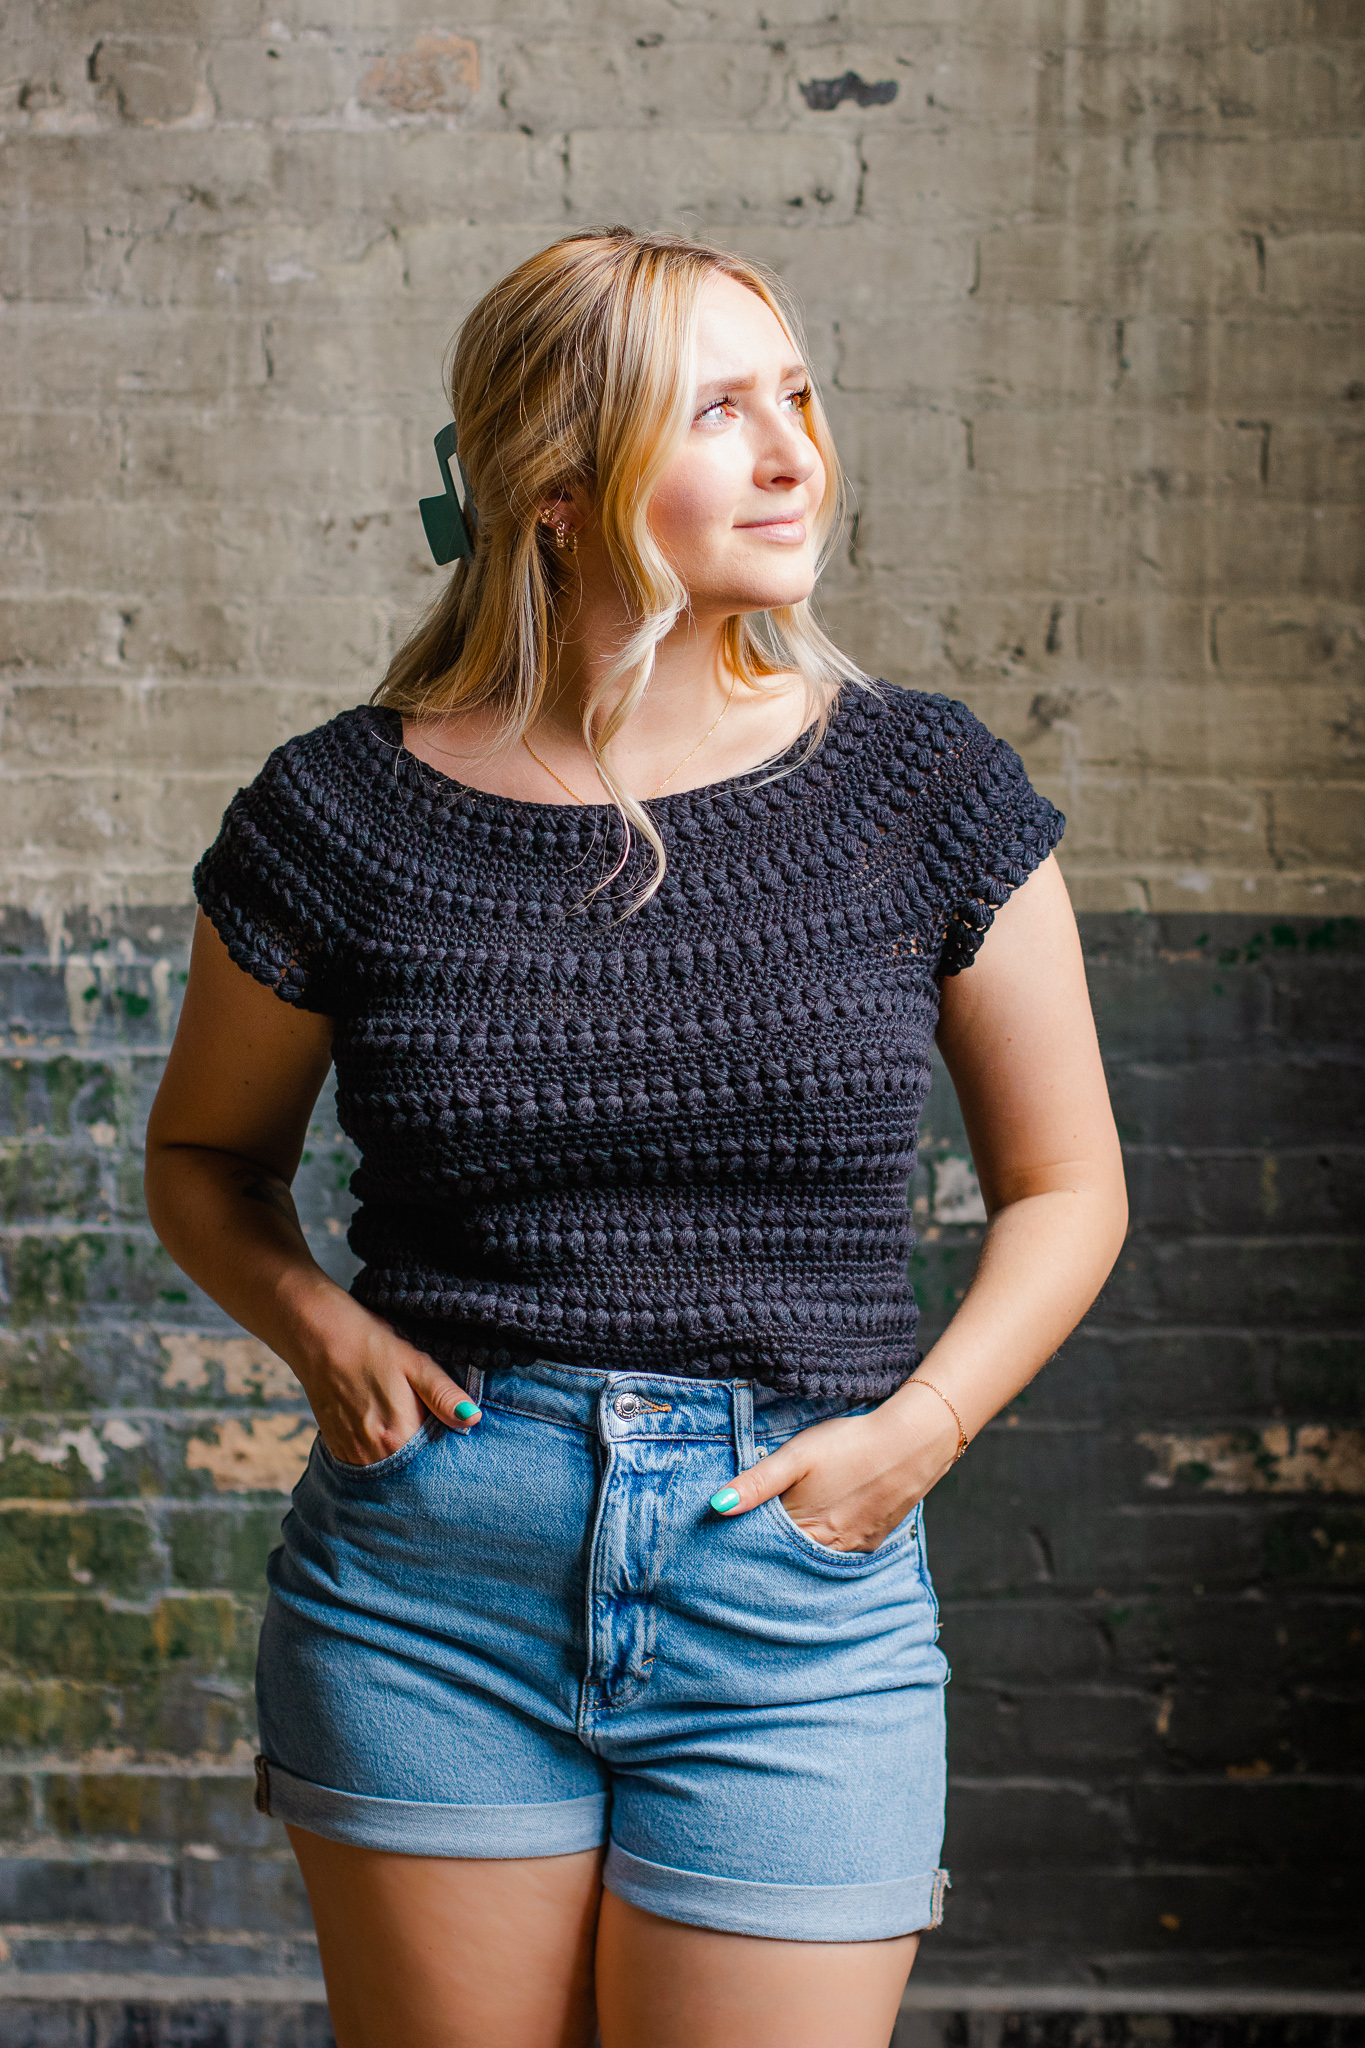 Crochet Circle Yoke Pullover Top-down in the Round Sweater PDF